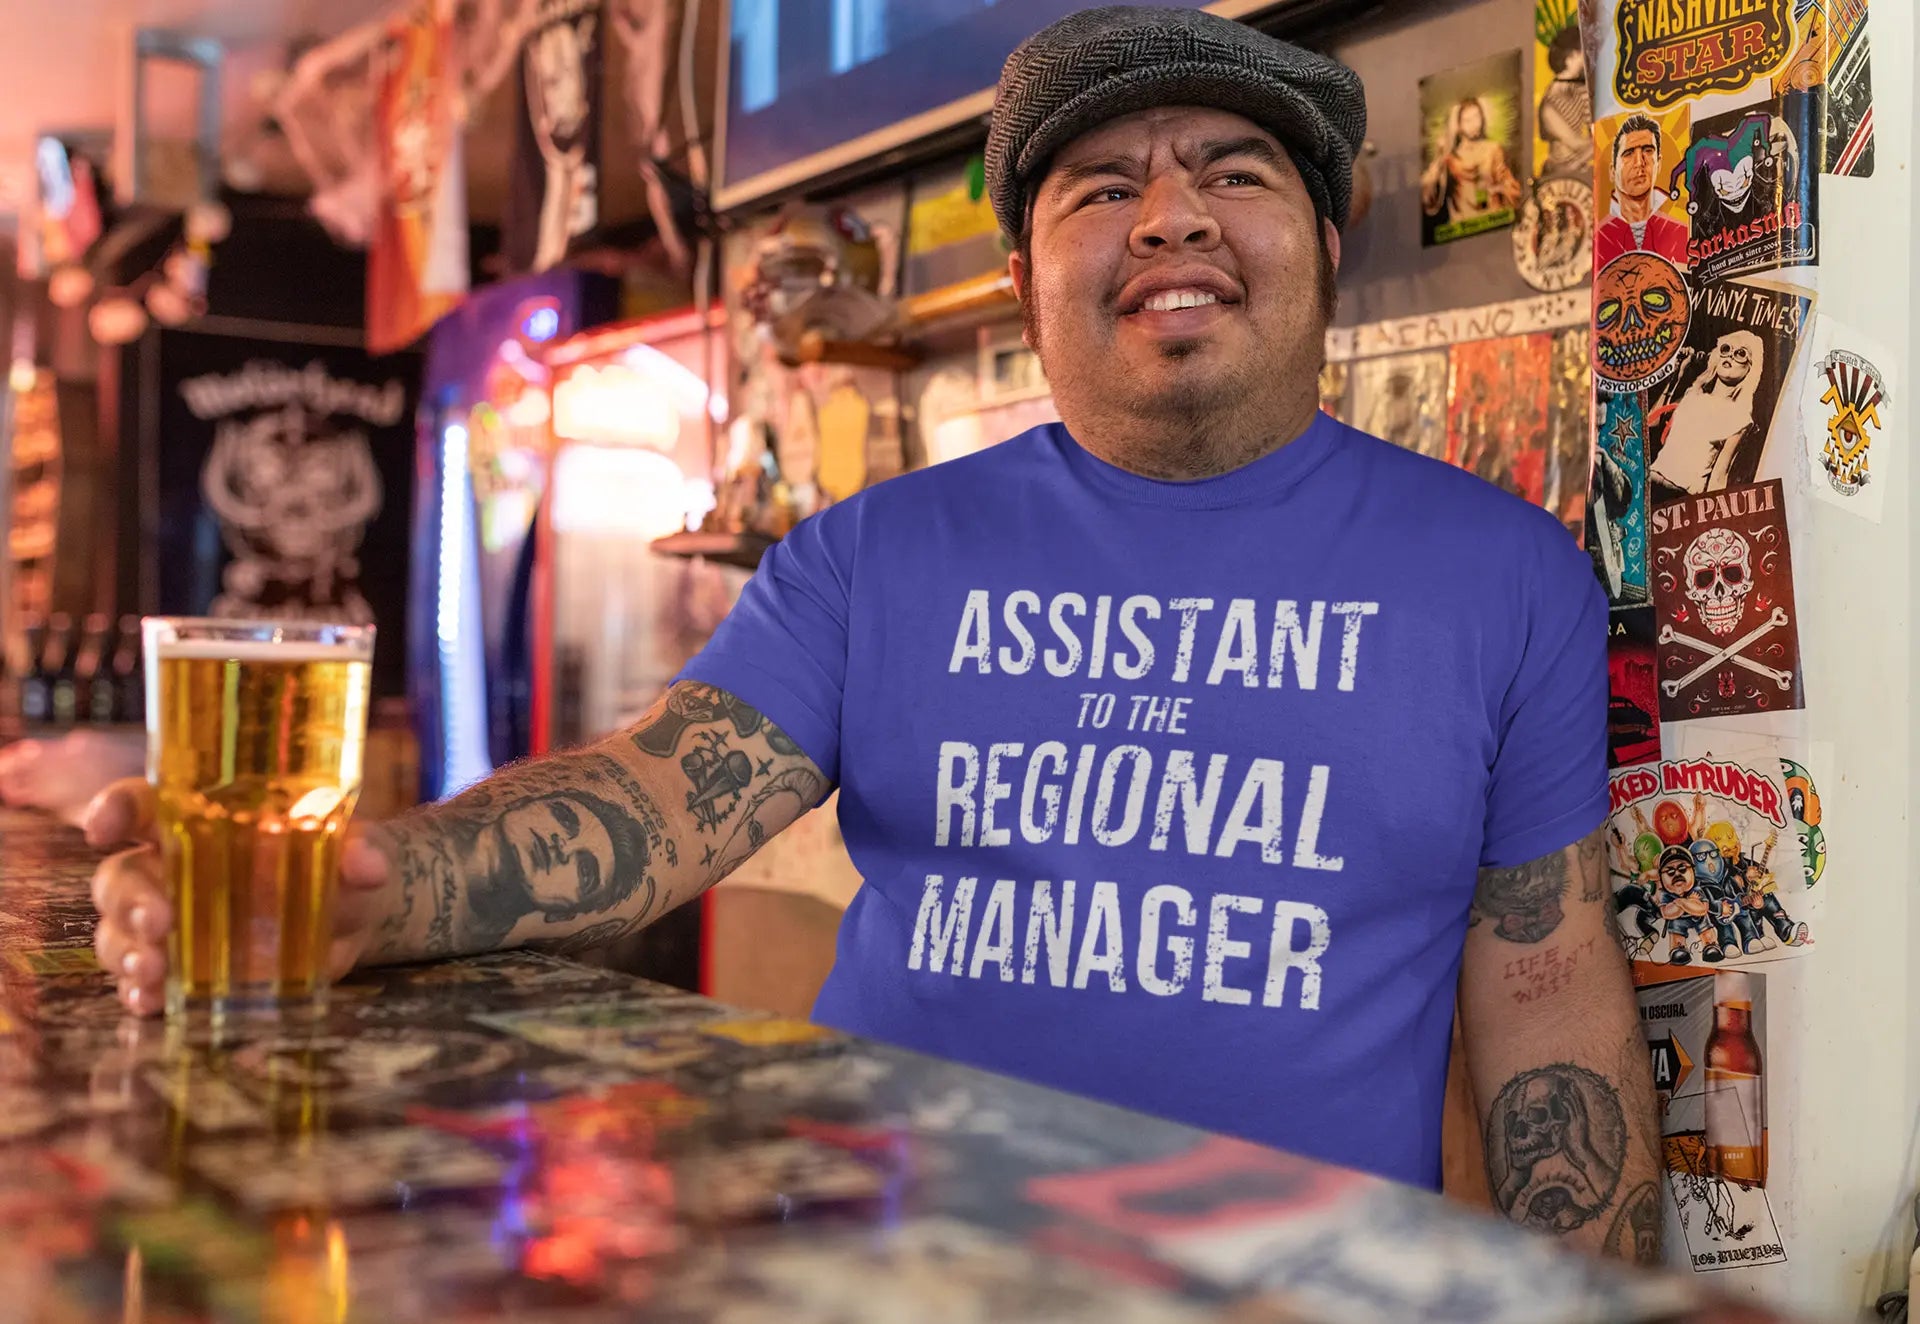 Assistant To The Regional Manager Tshirt - Donkey Tees